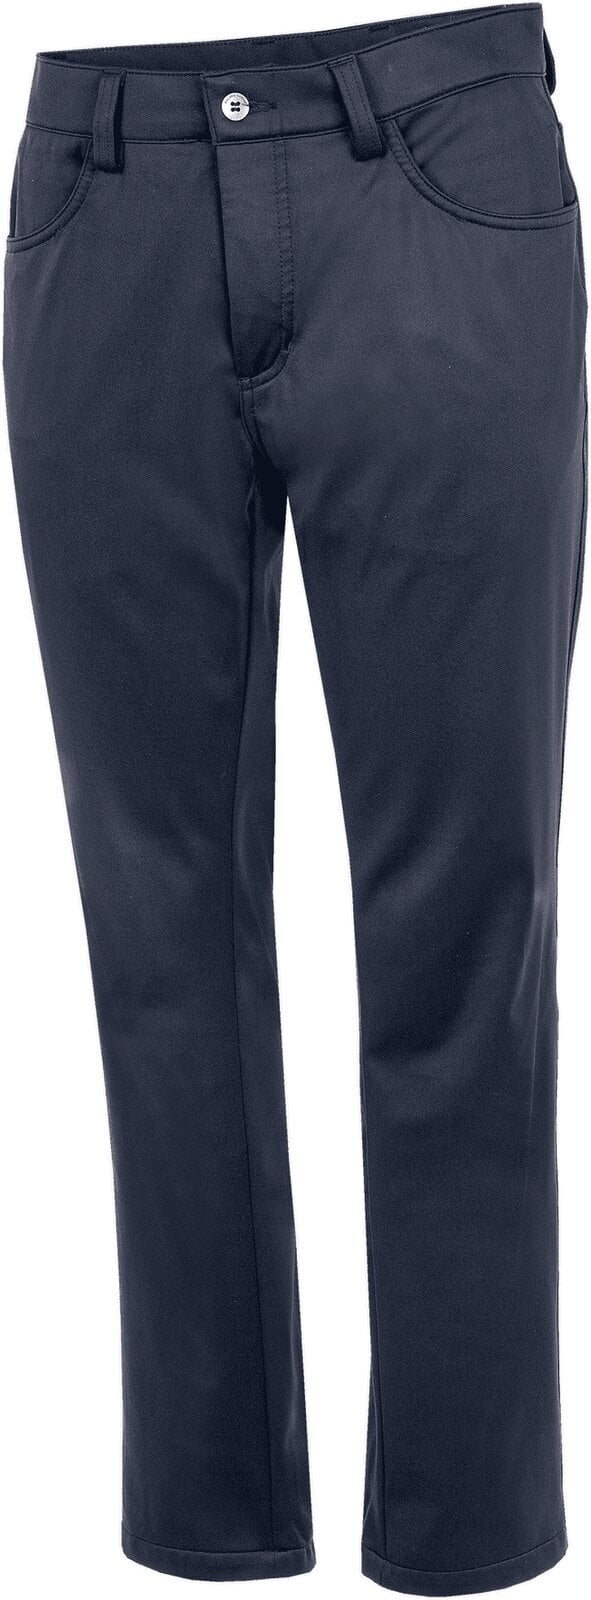 Nadrágok Galvin Green Lane MensWindproof And Water Repellent Pants Navy 32/32